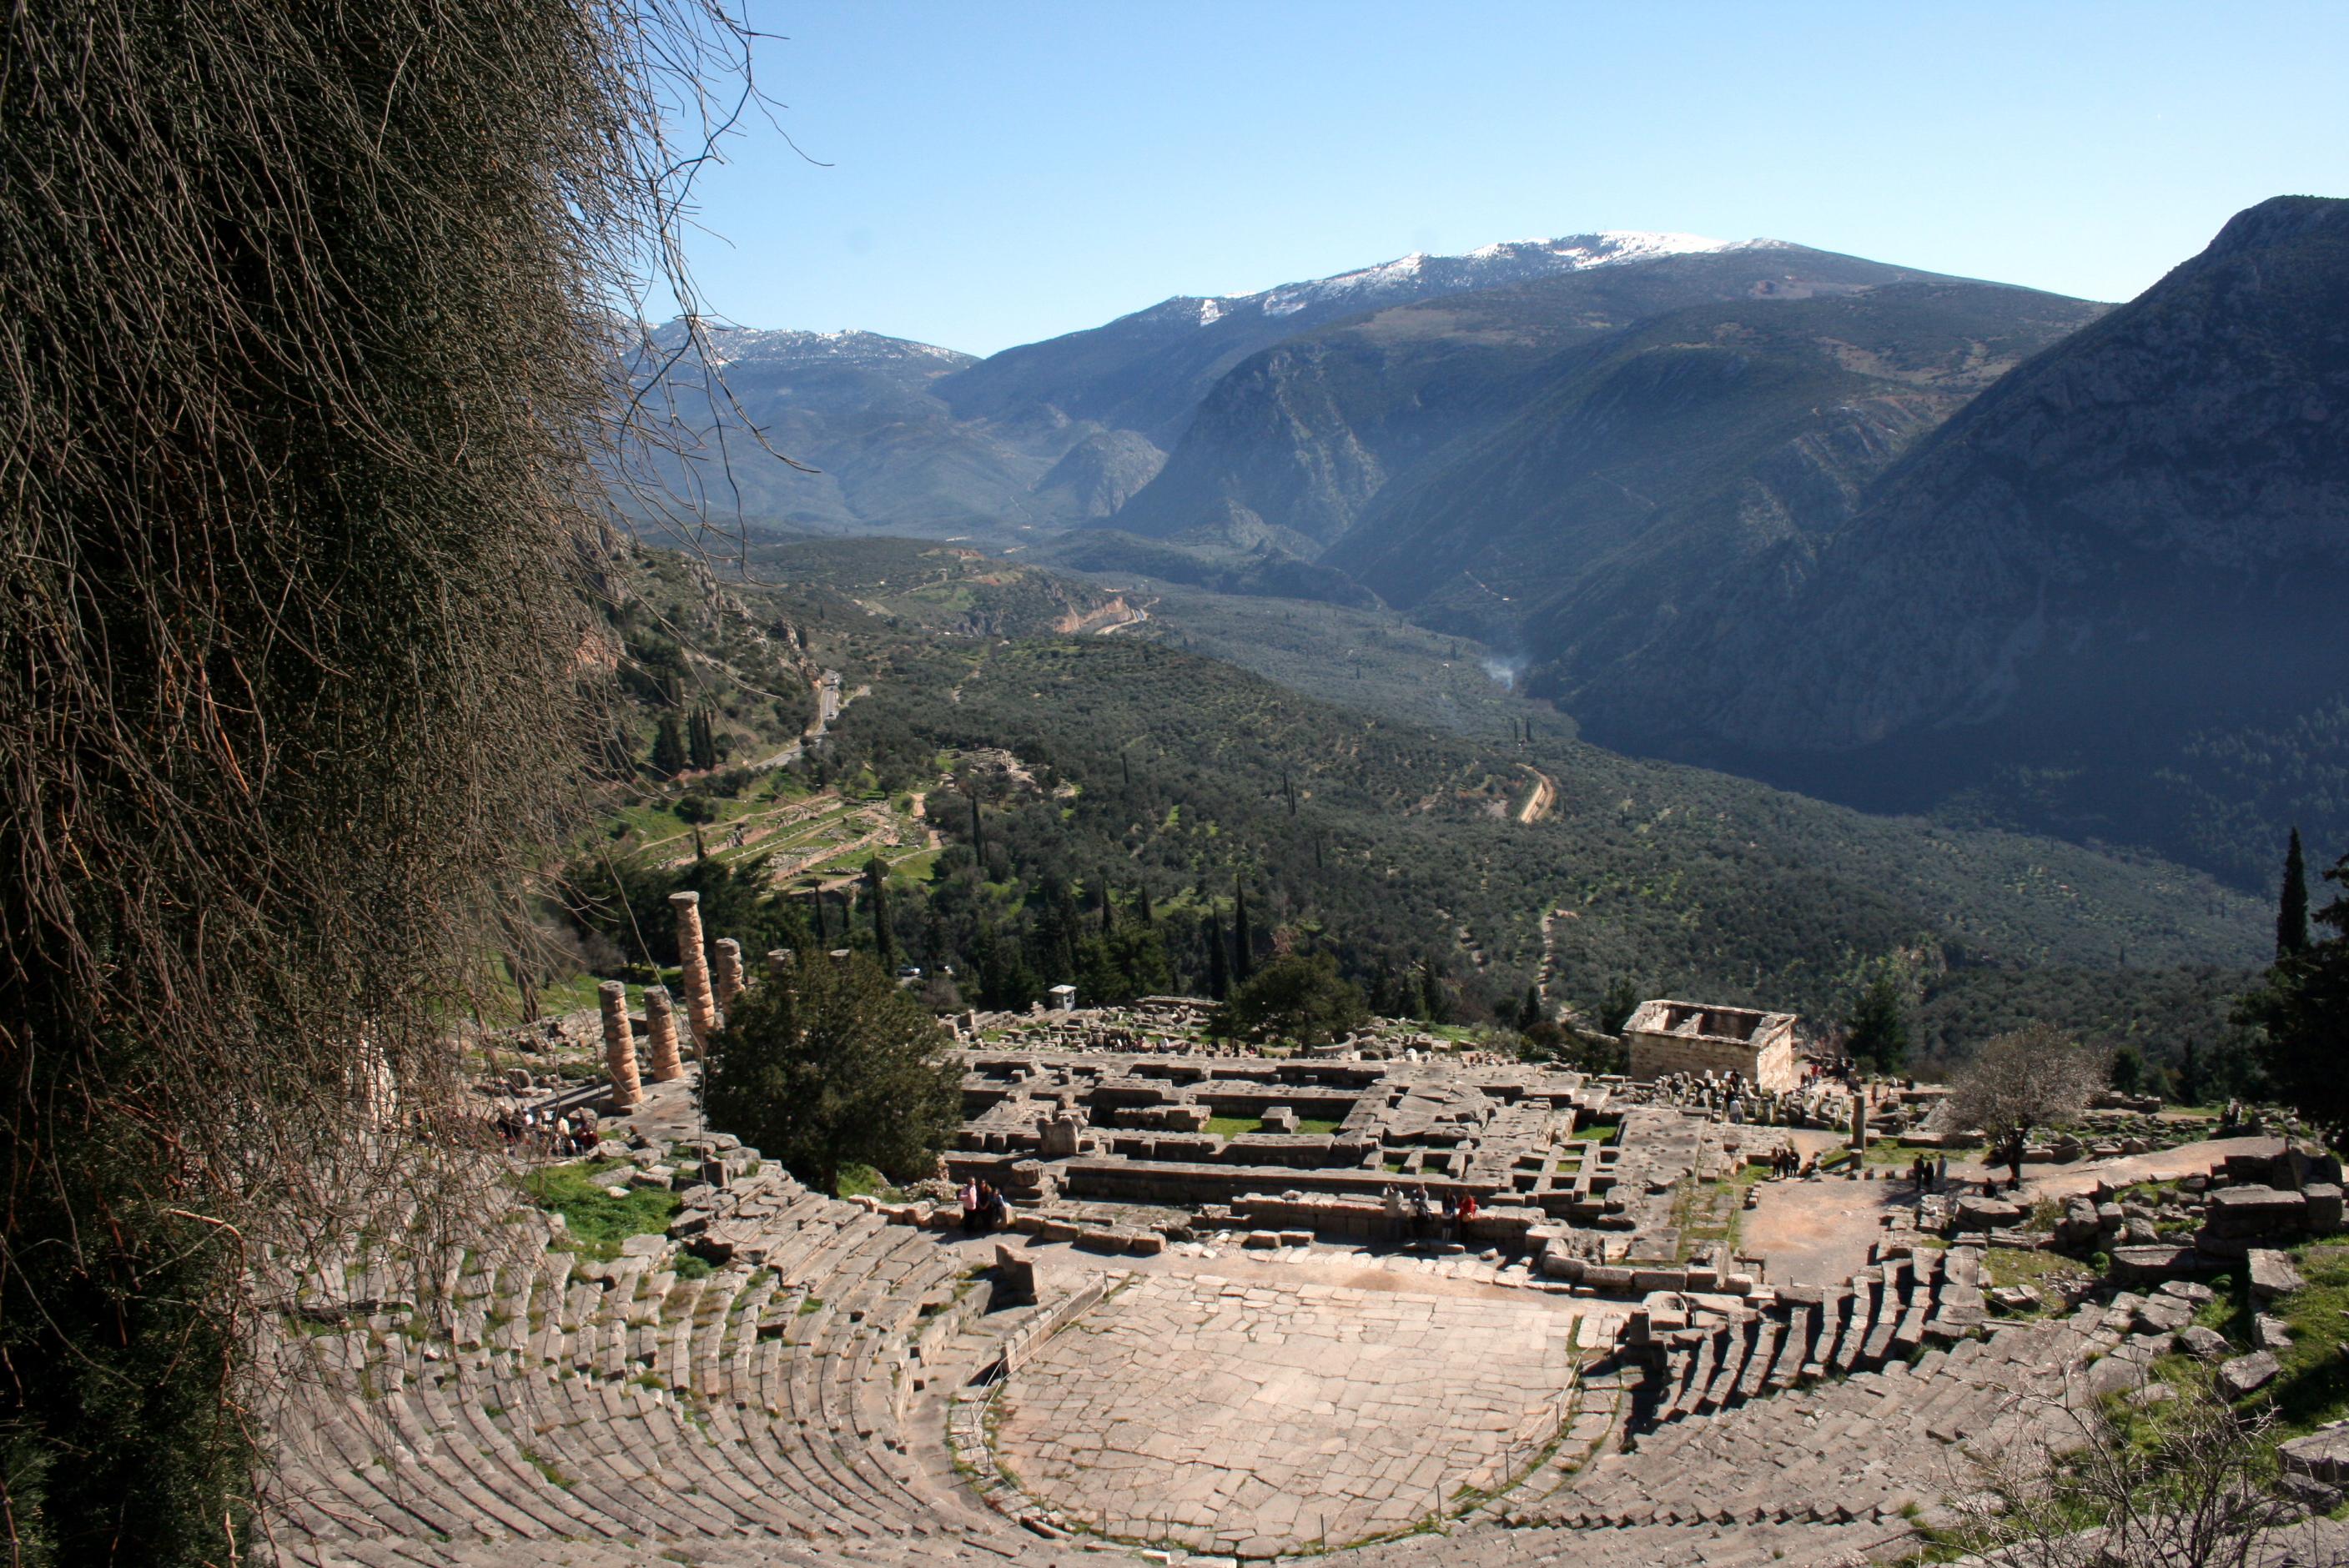 Photo of the Greek sanctuary at Delphi. Photo shows the ancient theater in the foreground, the temple of Apollo in the mid-ground, and the valley and mountains that surround Delphi. Photo by Conor Trainor